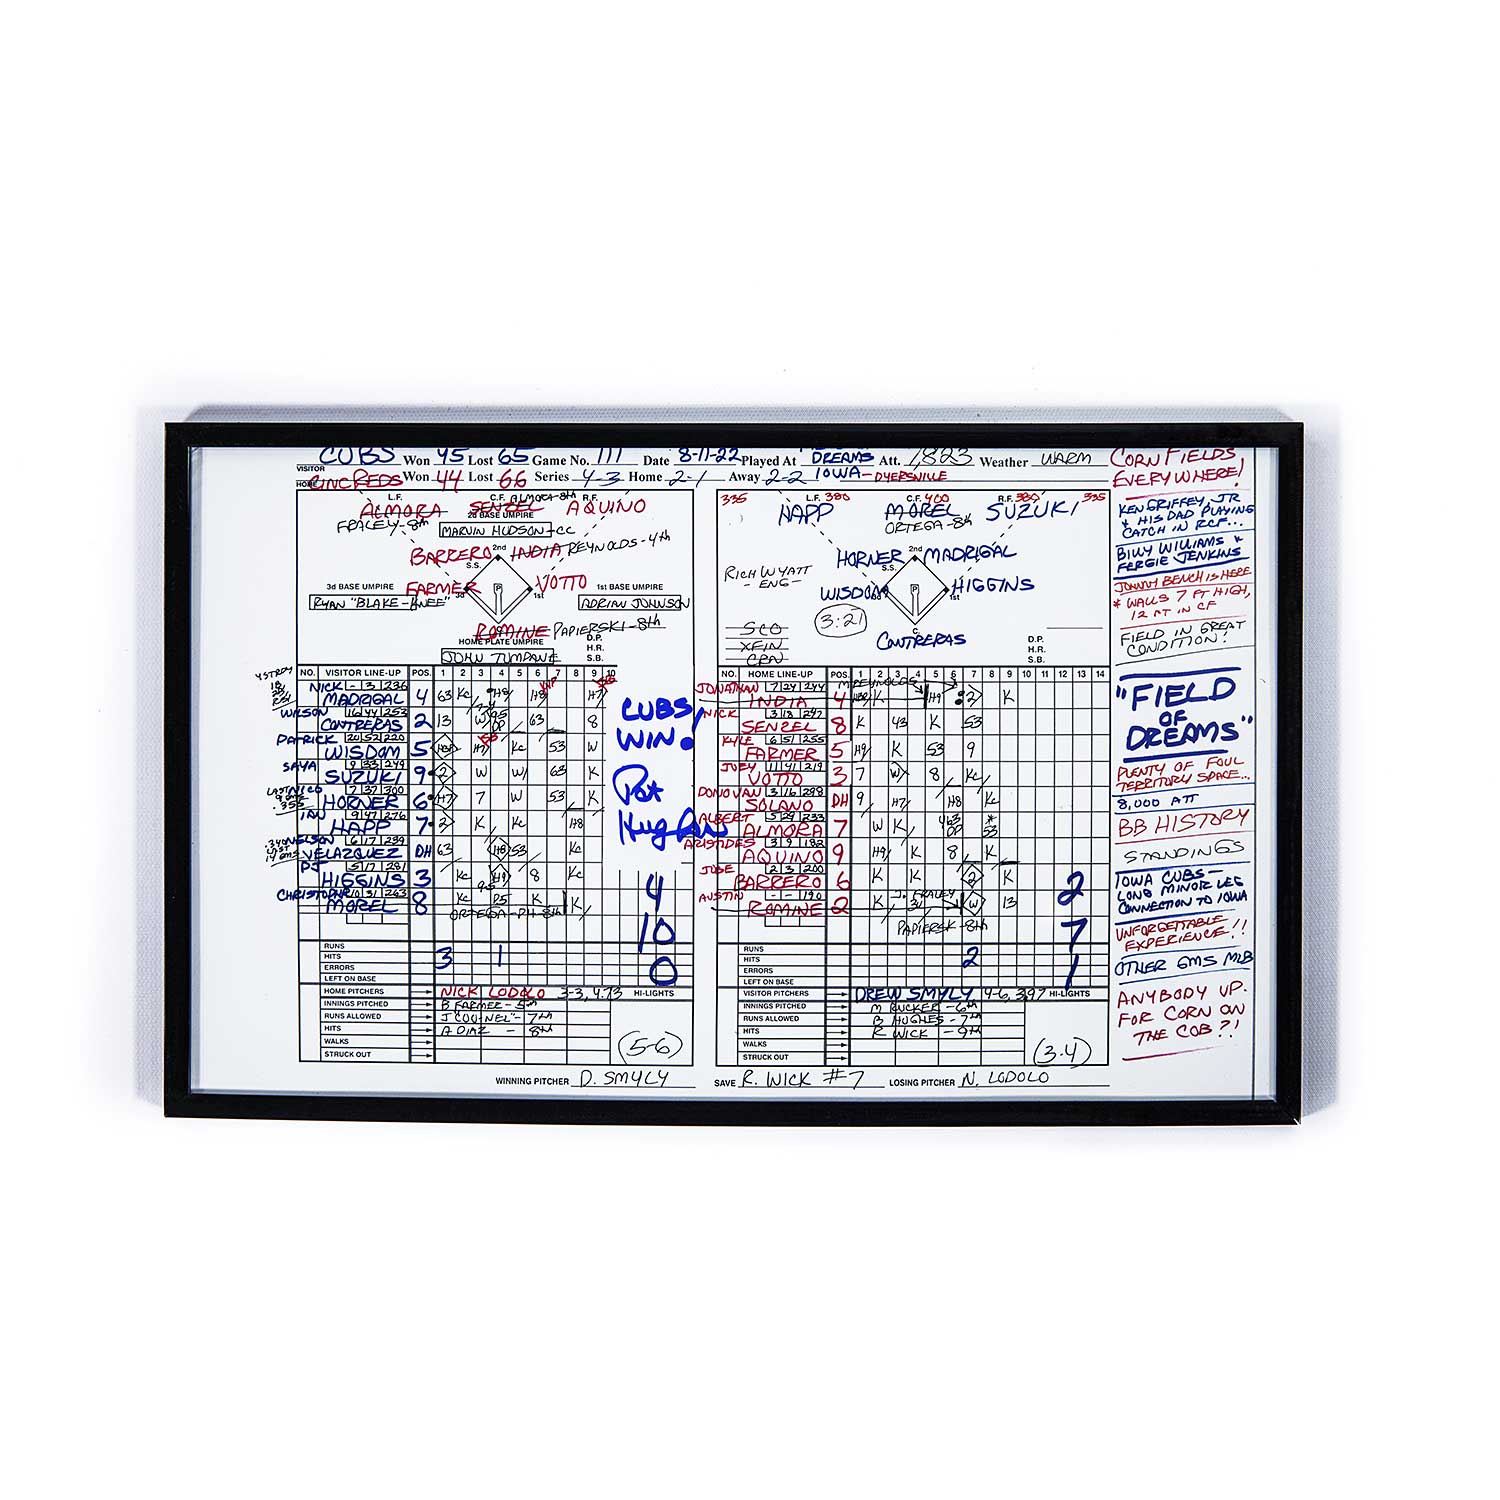 Chicago Cubs World Series Autographed Ball Display